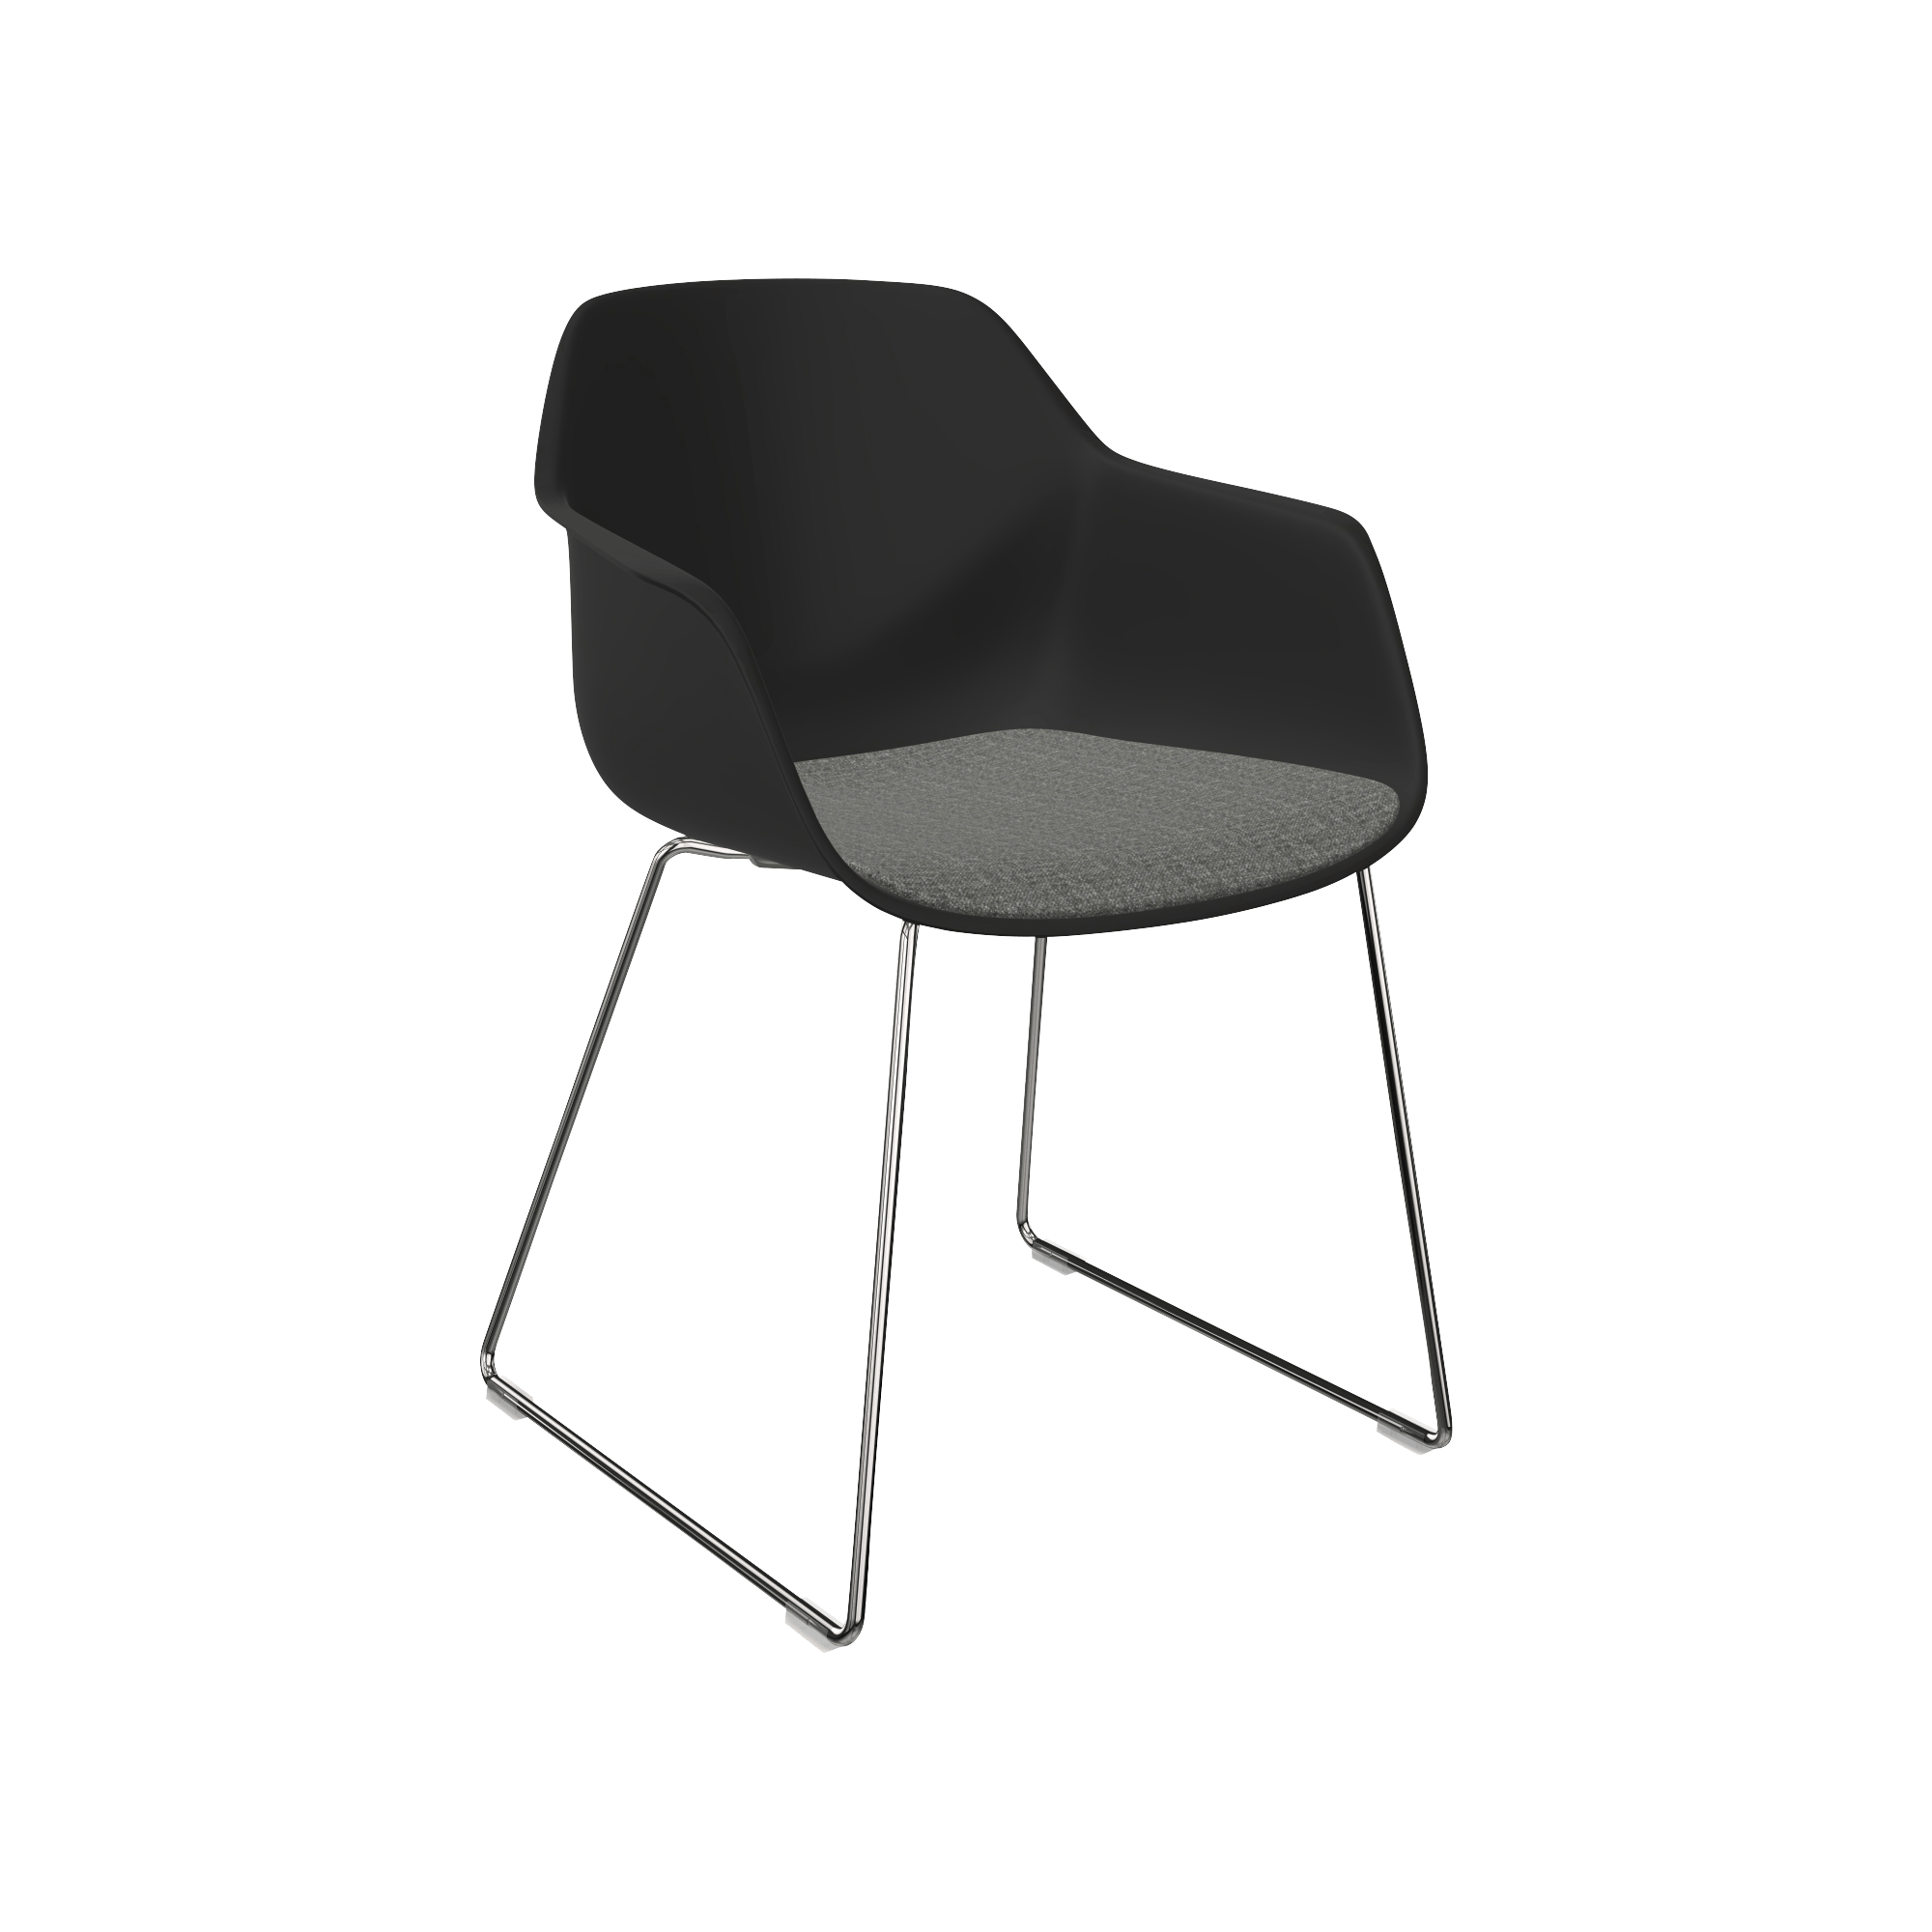 A black chair with a grey frame